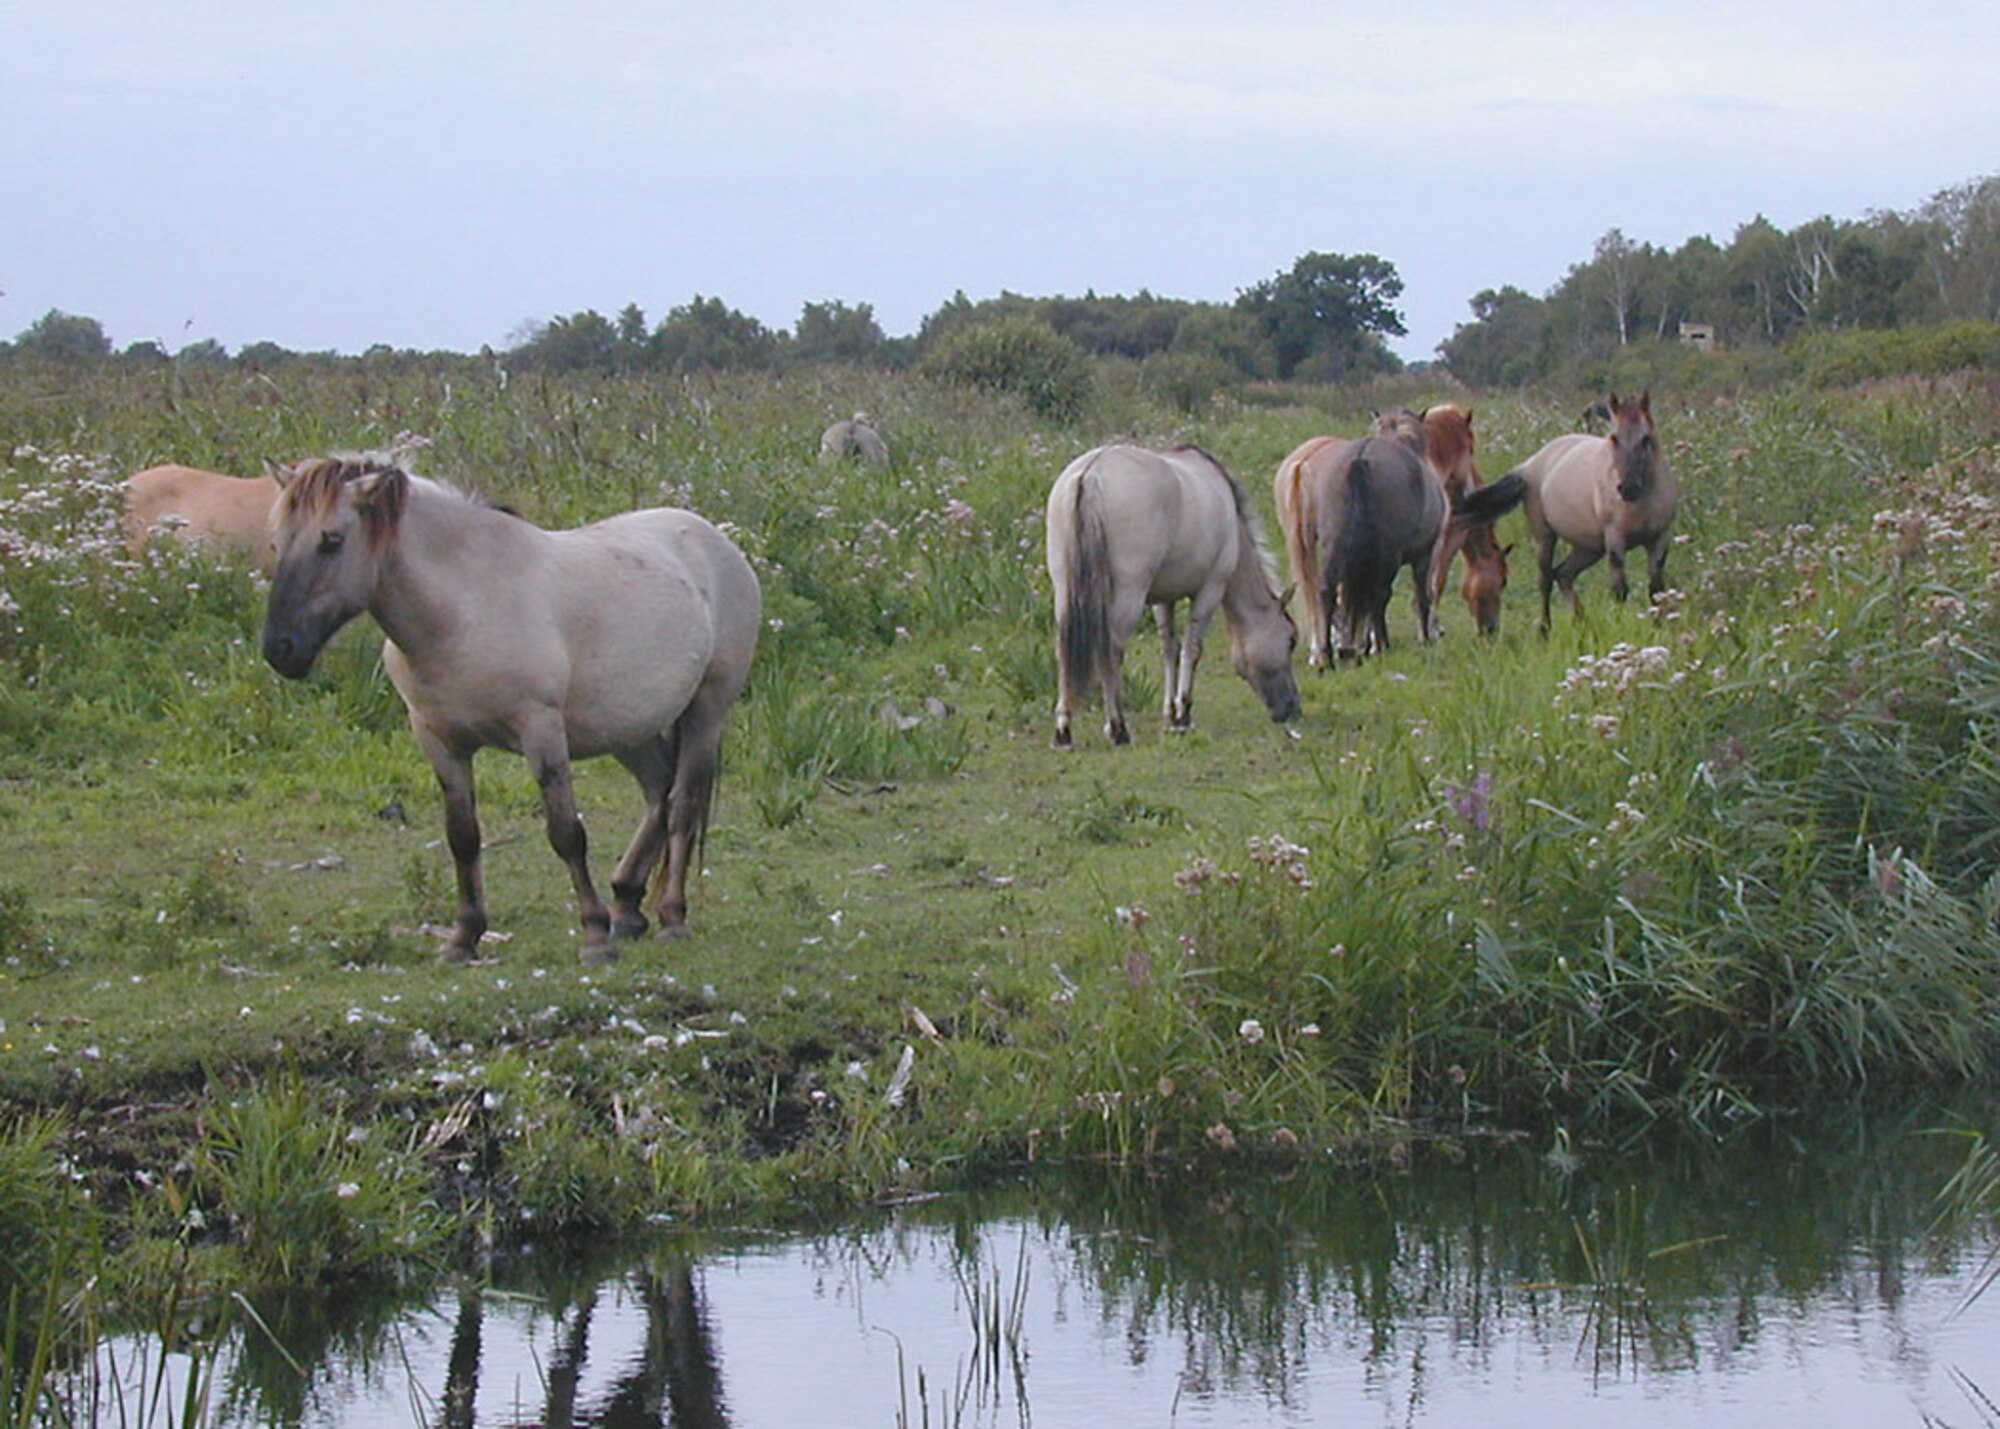 Wicken Fen National Nature Reserve is home to rare Konik ponies, which are direct descendants of the now extinct Tapan, which were brought here from Poland. (U.S. Air Force photo by Judith Wakelam)